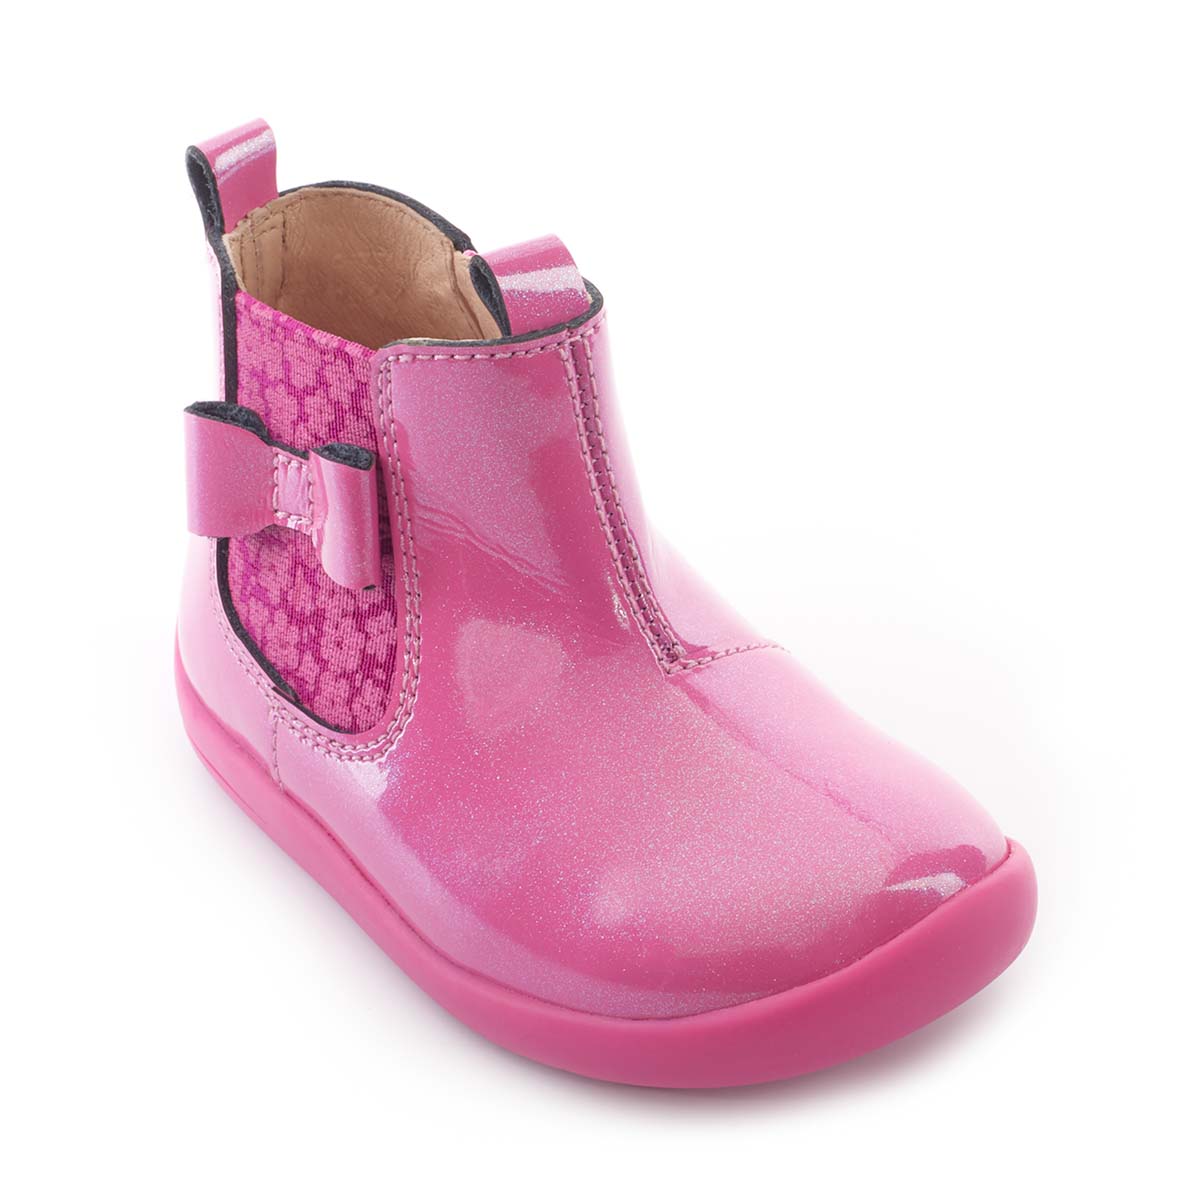 Start Rite - Wonderland Chelsea In Pink 0789-16F In Size 6 In Plain Pink Infant Girls Boots  In Pink For kids